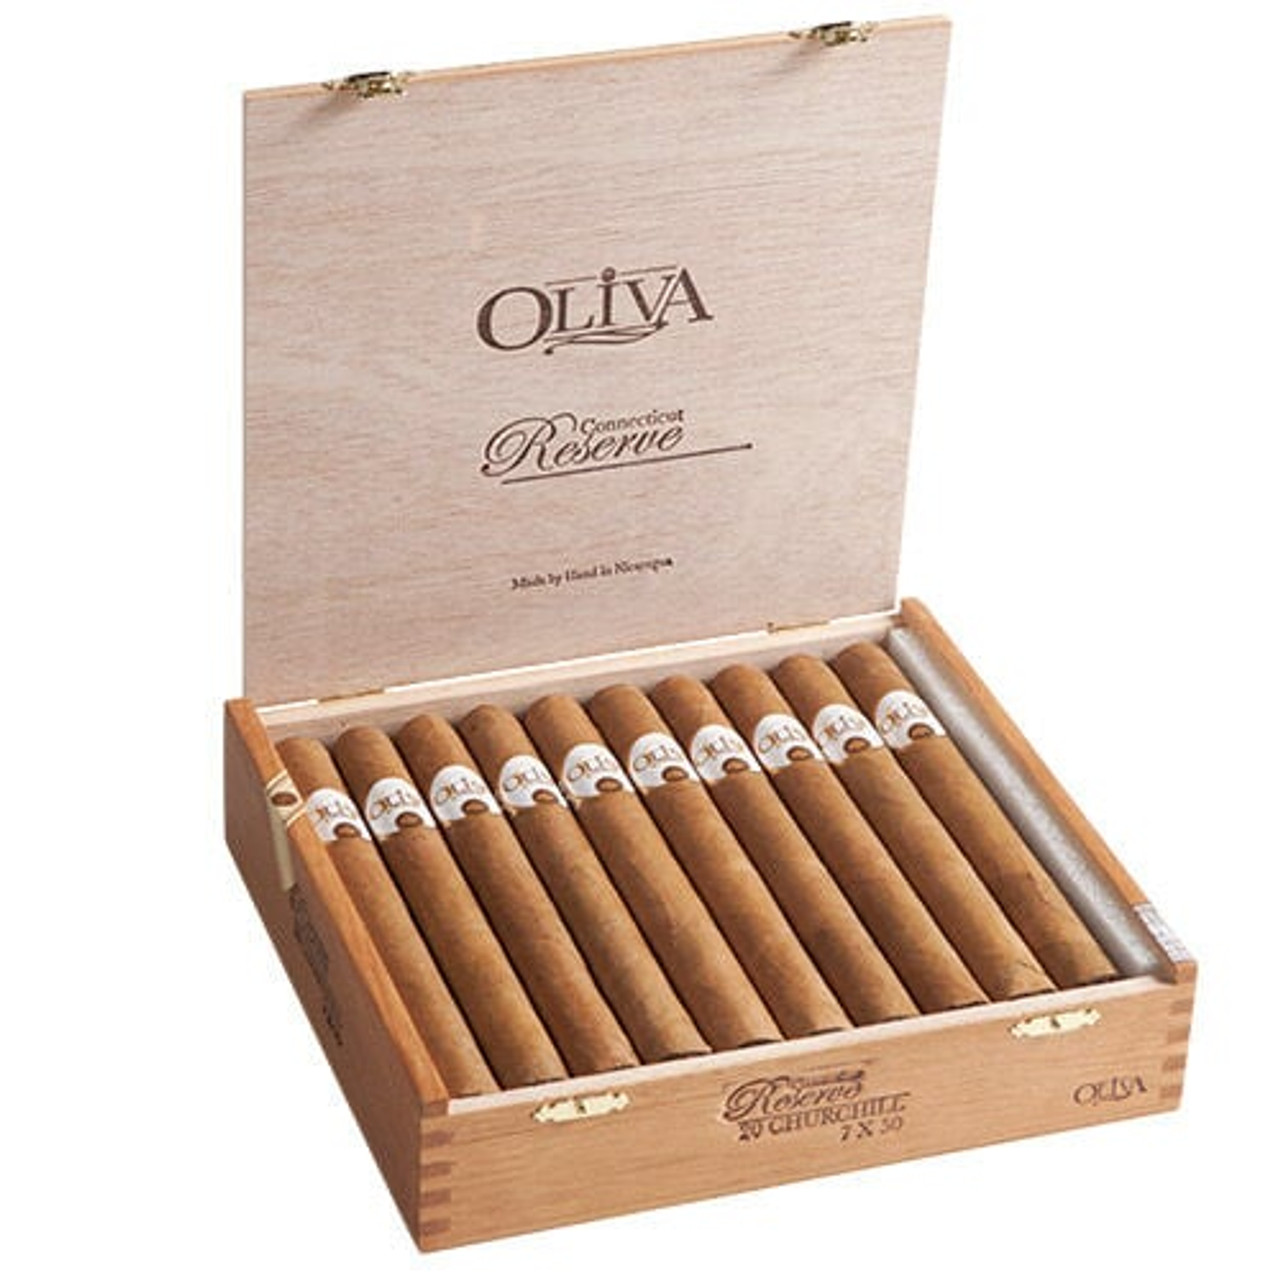 Oliva Connecticut Reserve Lonsdale Cigars - 6.5 x 44 (Box of 20) Open